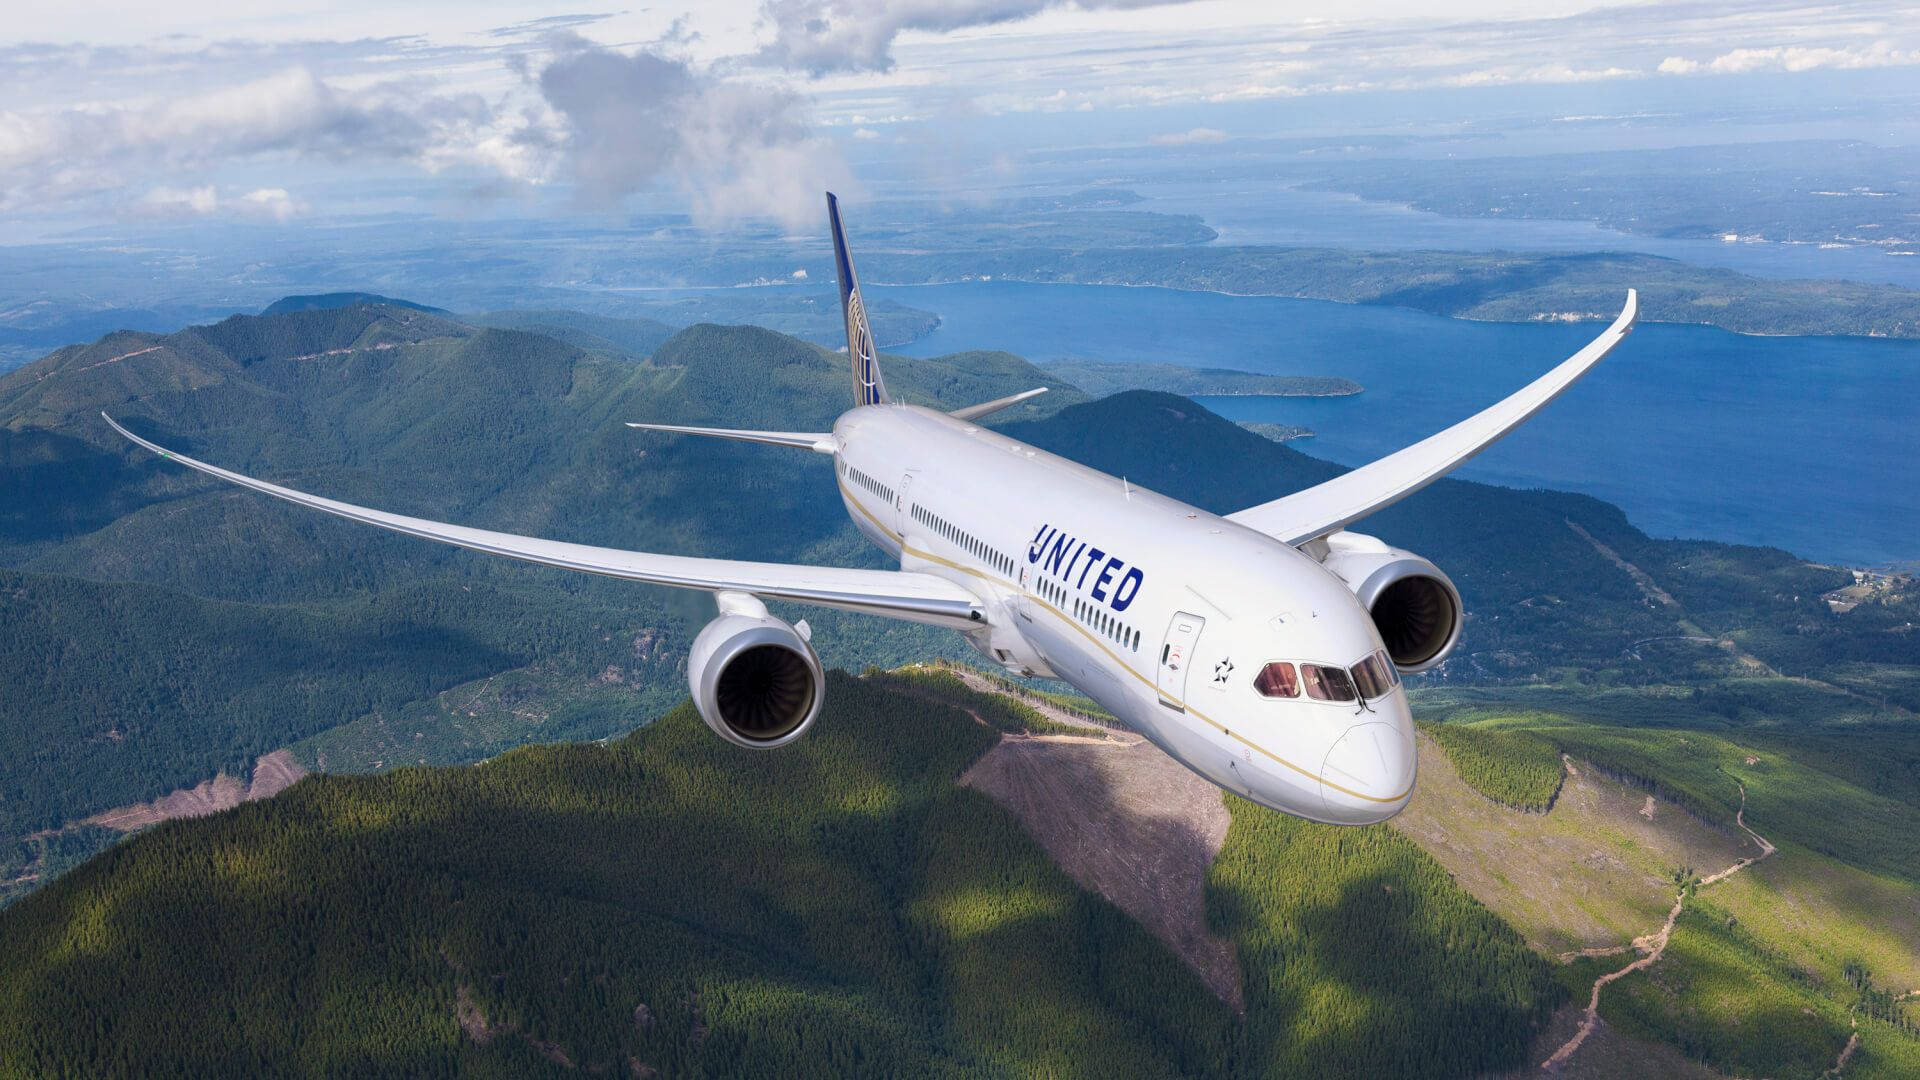 United Airplane Soaring Over High Mountains Wallpaper